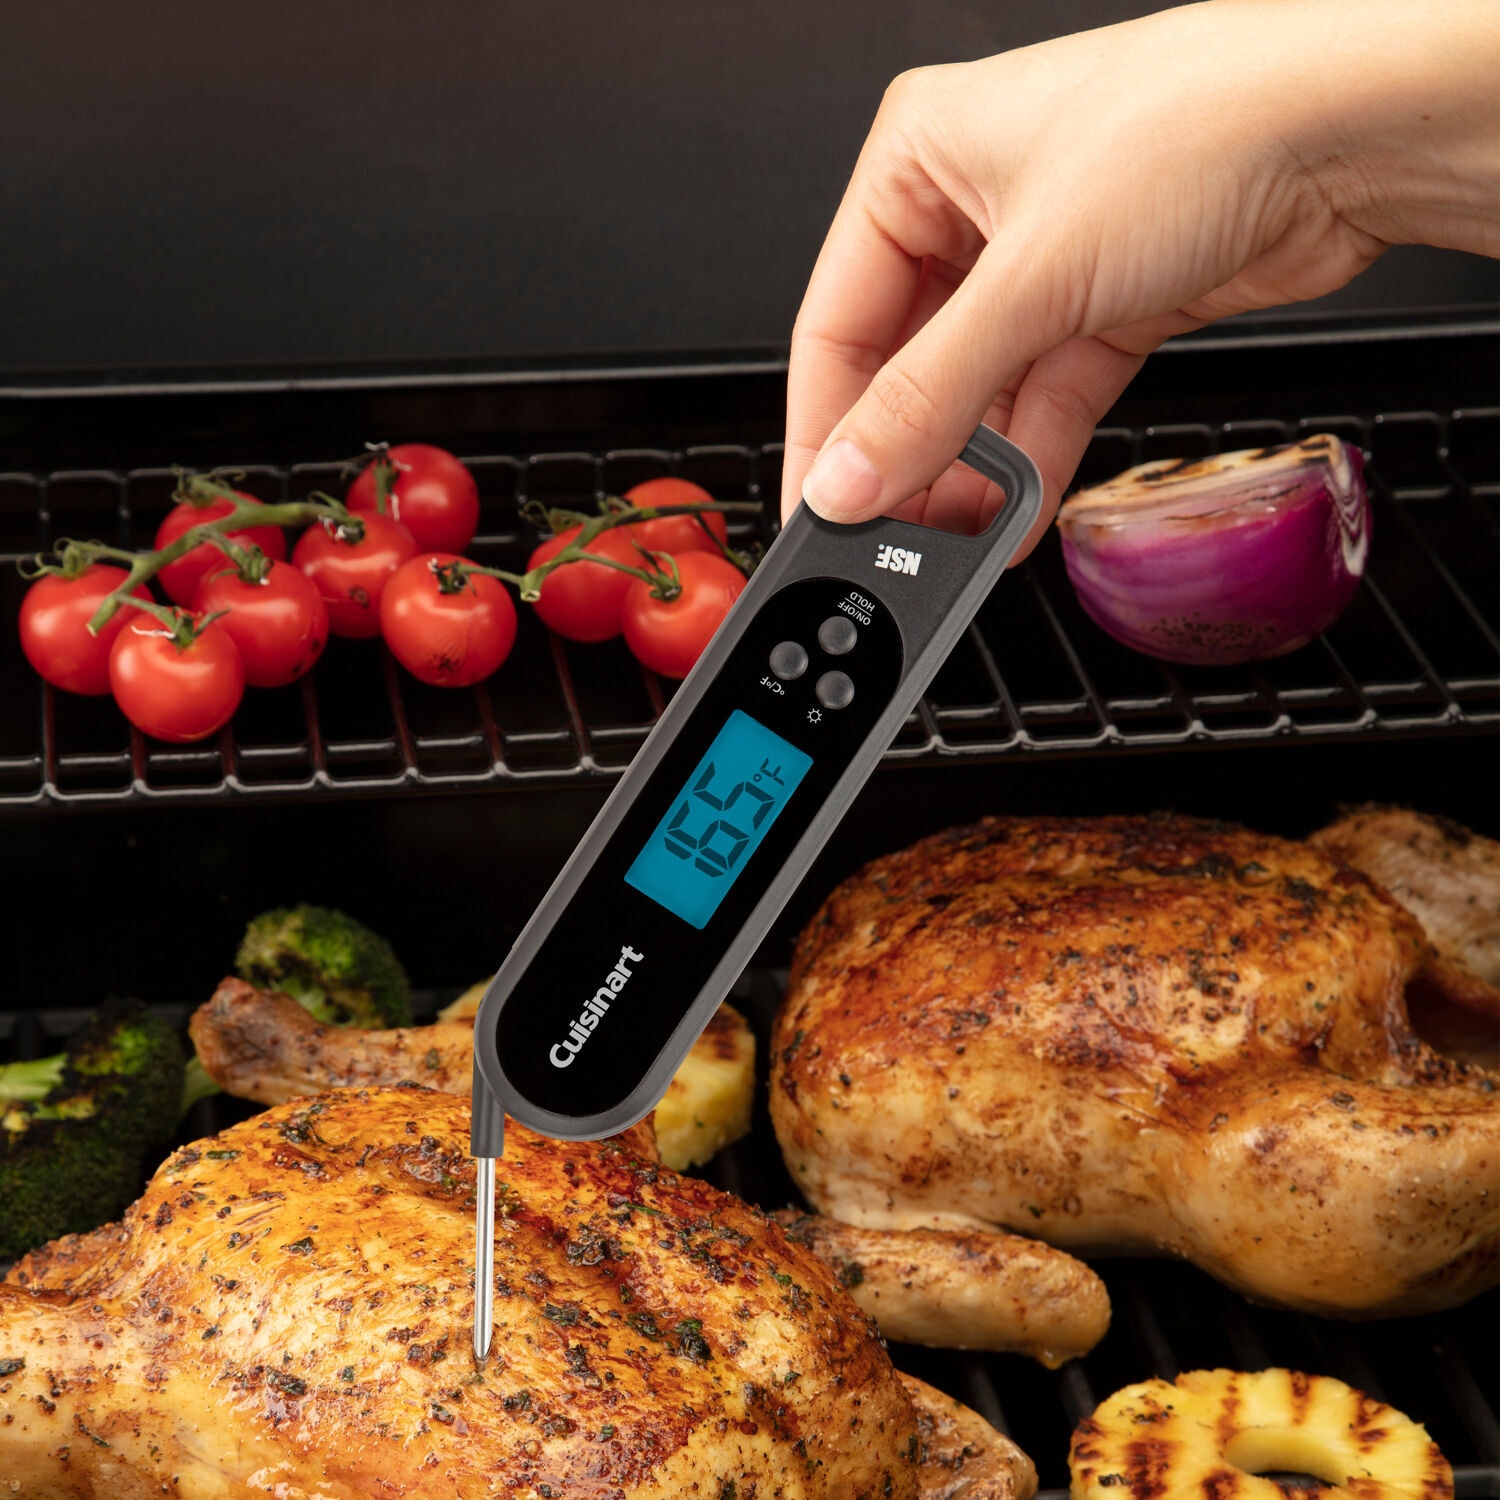 Taylor 3-inch Dial Leave-in Meat Thermometer with Meat Chart on Dial